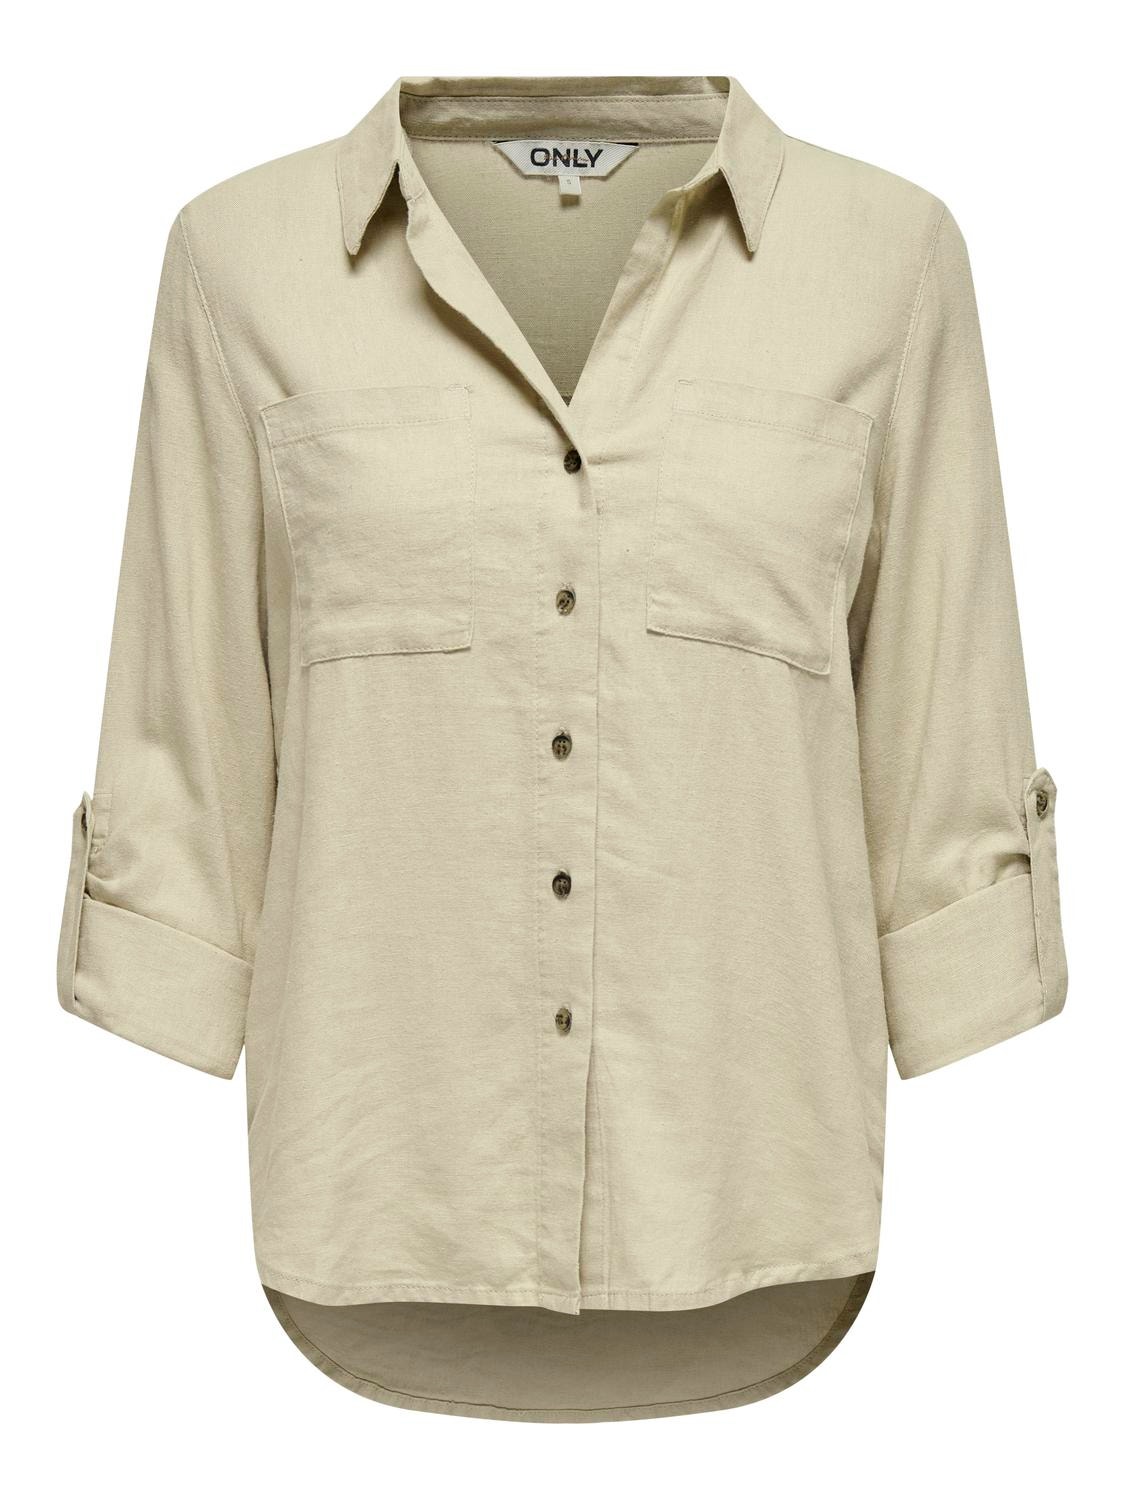 ONLY Shirt with long sleeves -Oxford Tan - 15311011